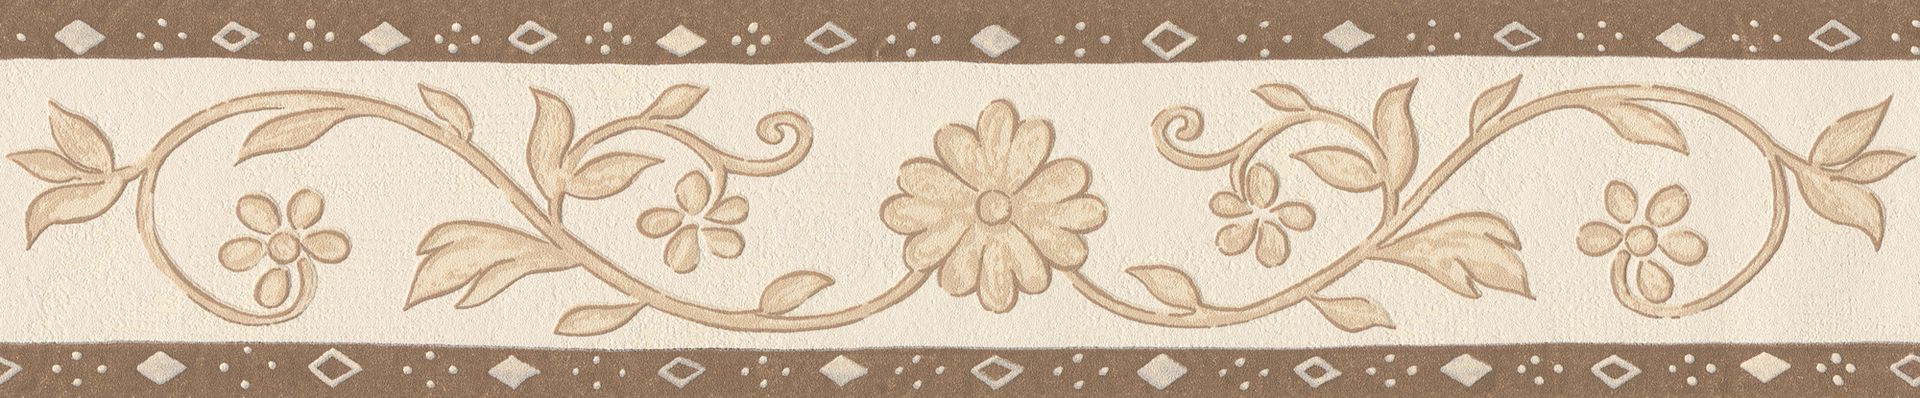 A.S. Création Only Borders 10 5241-71 Creme Floral